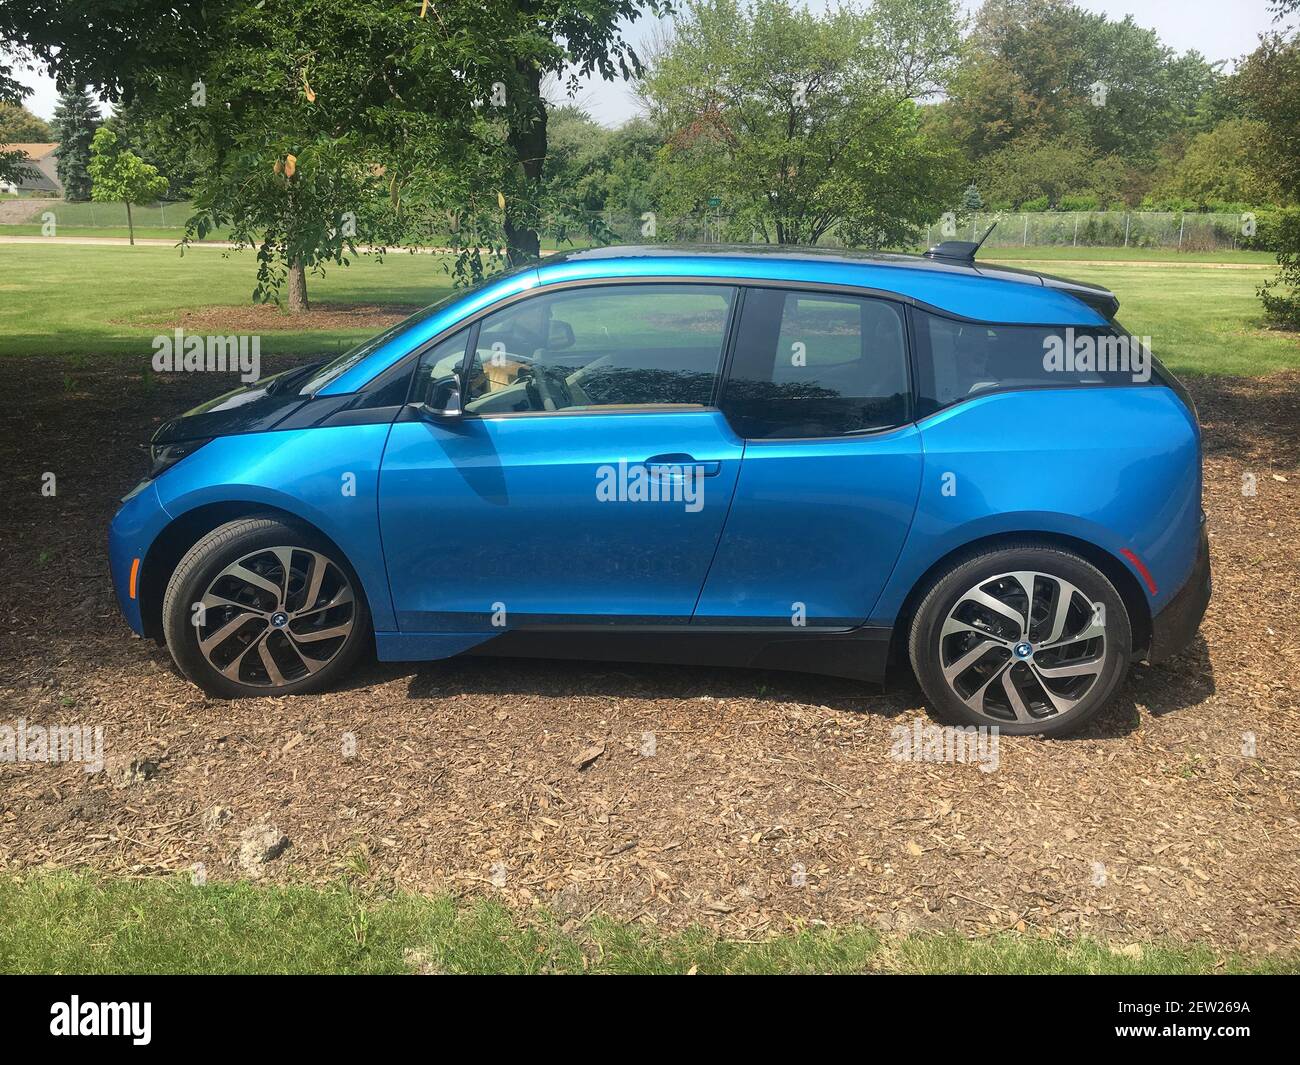 The 2017 BMW i3 REx electric vehicle with a 2.4 gallon range extender gets  a bigger battery pack and capacity for 2017, increasing range from 72 miles  to 97 electric-only miles. The